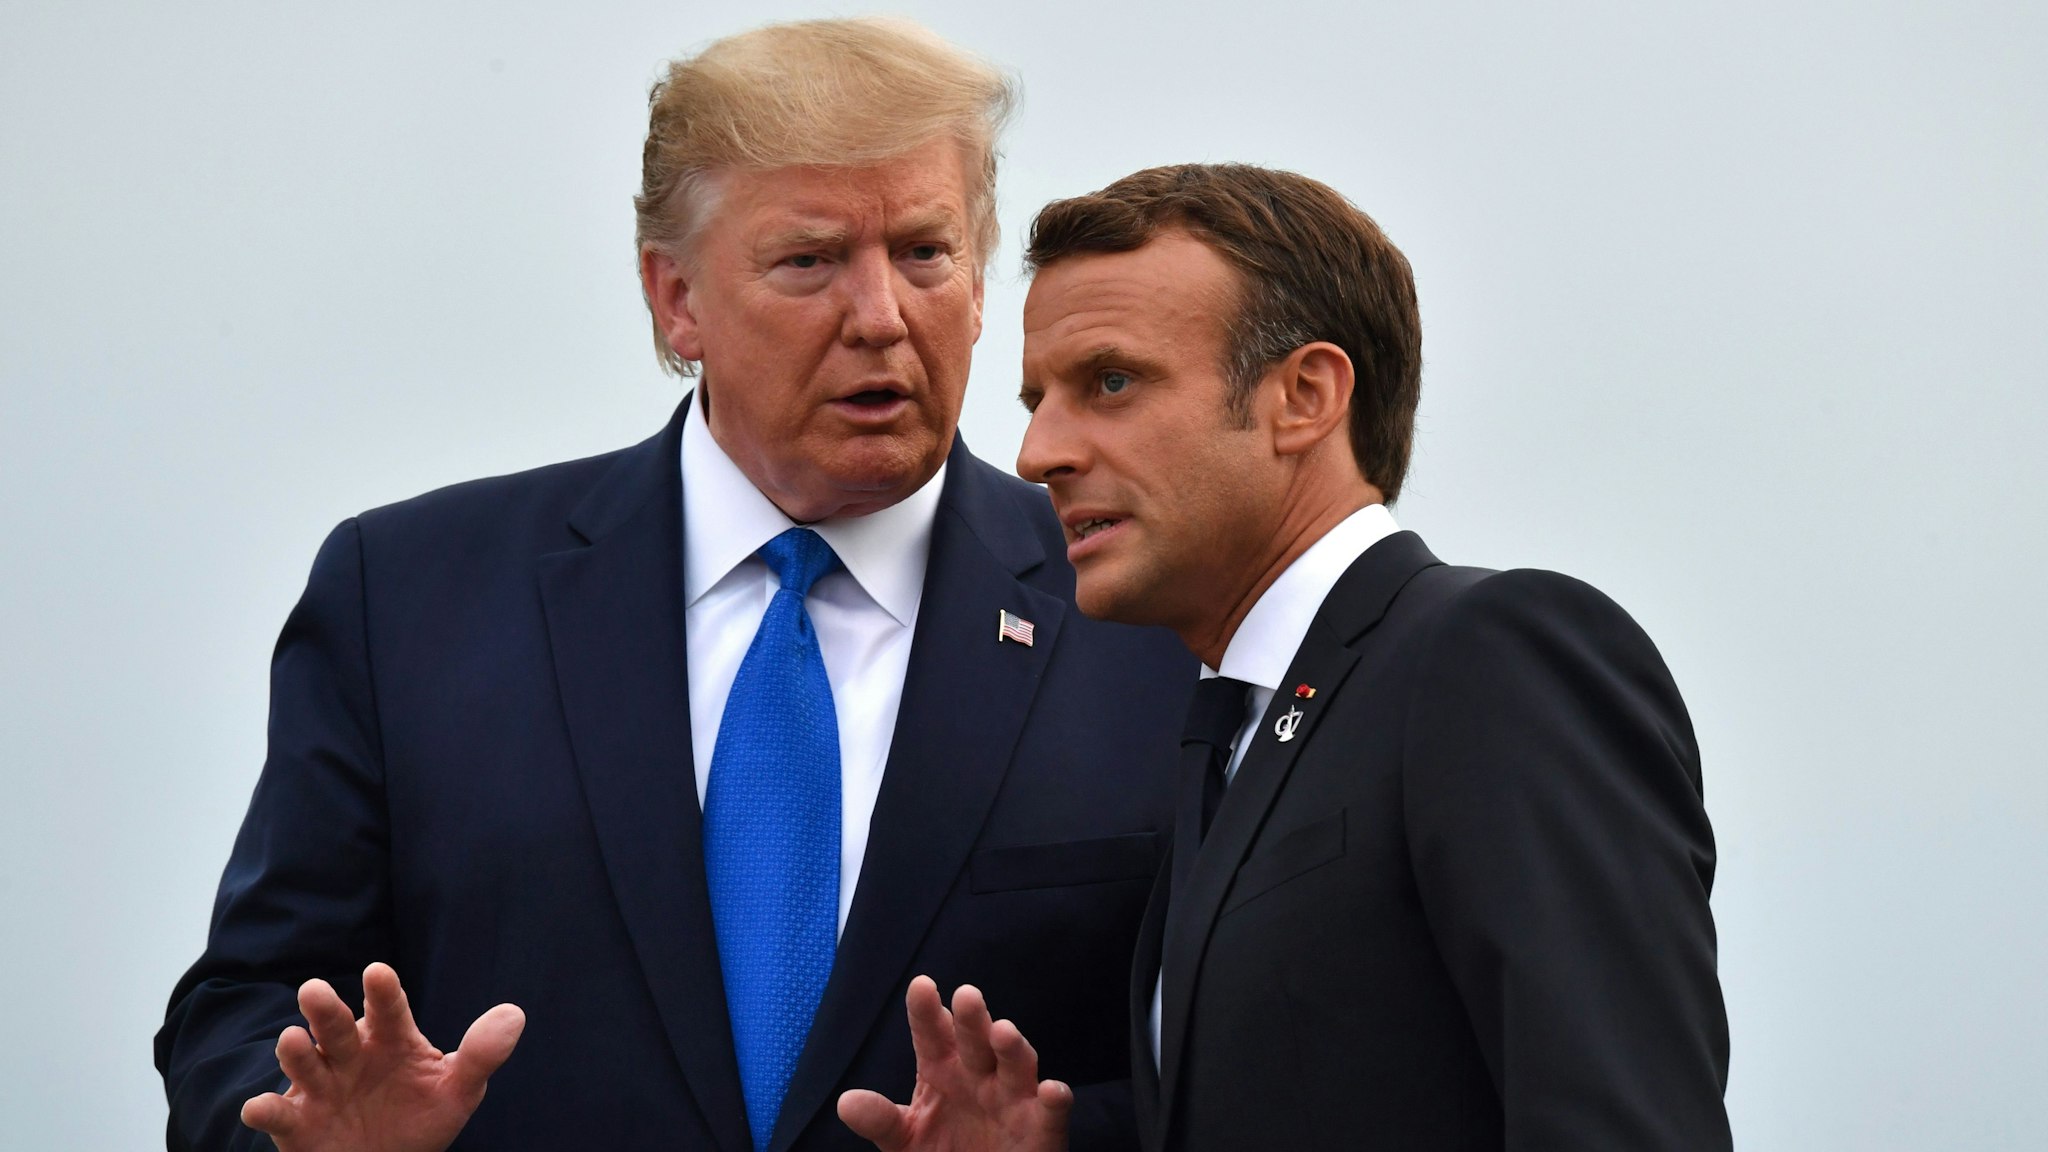 French President Emmanuel Macron (R) chats with US President Donald Trump at the Biarritz lighthouse, southwestern France, ahead of a working dinner on August 24, 2019, on the first day of the annual G7 Summit attended by the leaders of the world's seven richest democracies, Britain, Canada, France, Germany, Italy, Japan and the United States. - EU leaders rounded on US President Donald Trump over his trade threats at a G7 summit in France overshadowed by trans-Atlantic tensions and worries about the global economy.